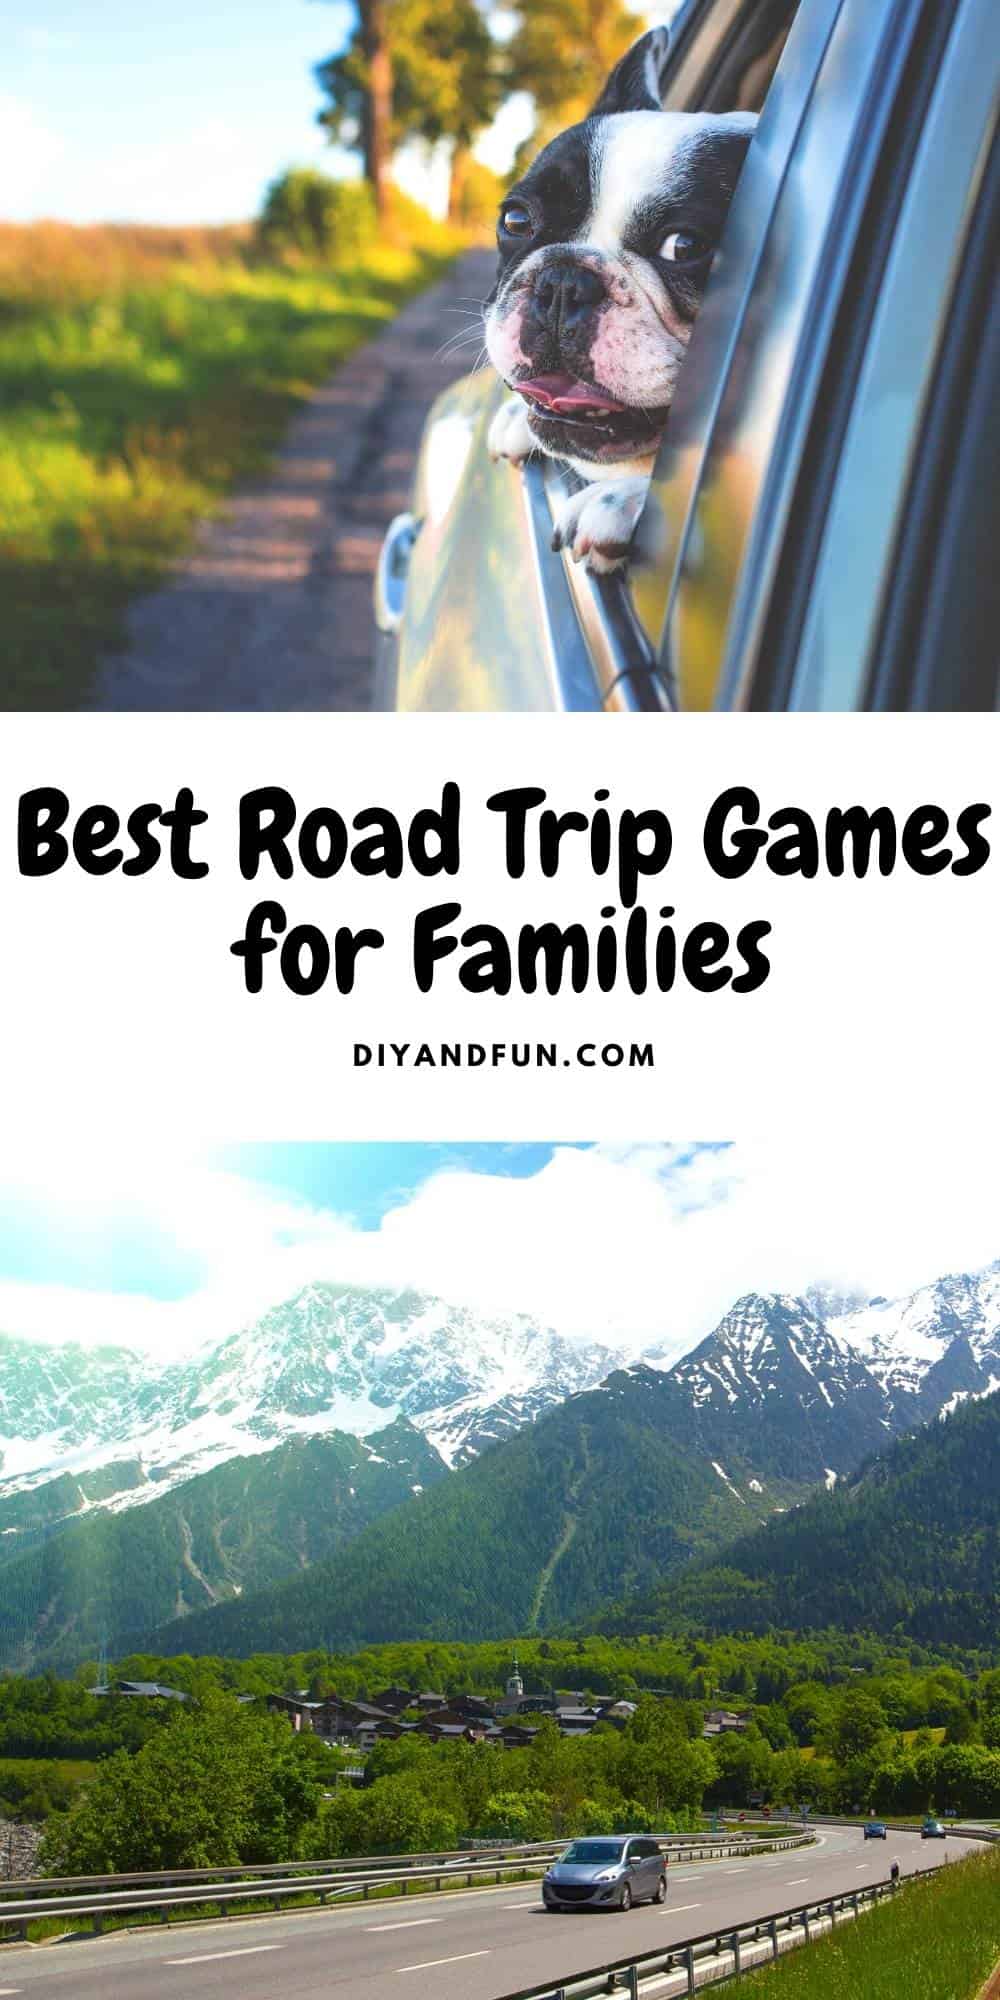 Best Road Trip Games for Families, 22 great ideas for passing the time while on a family trip. Includes solo and group ideas.